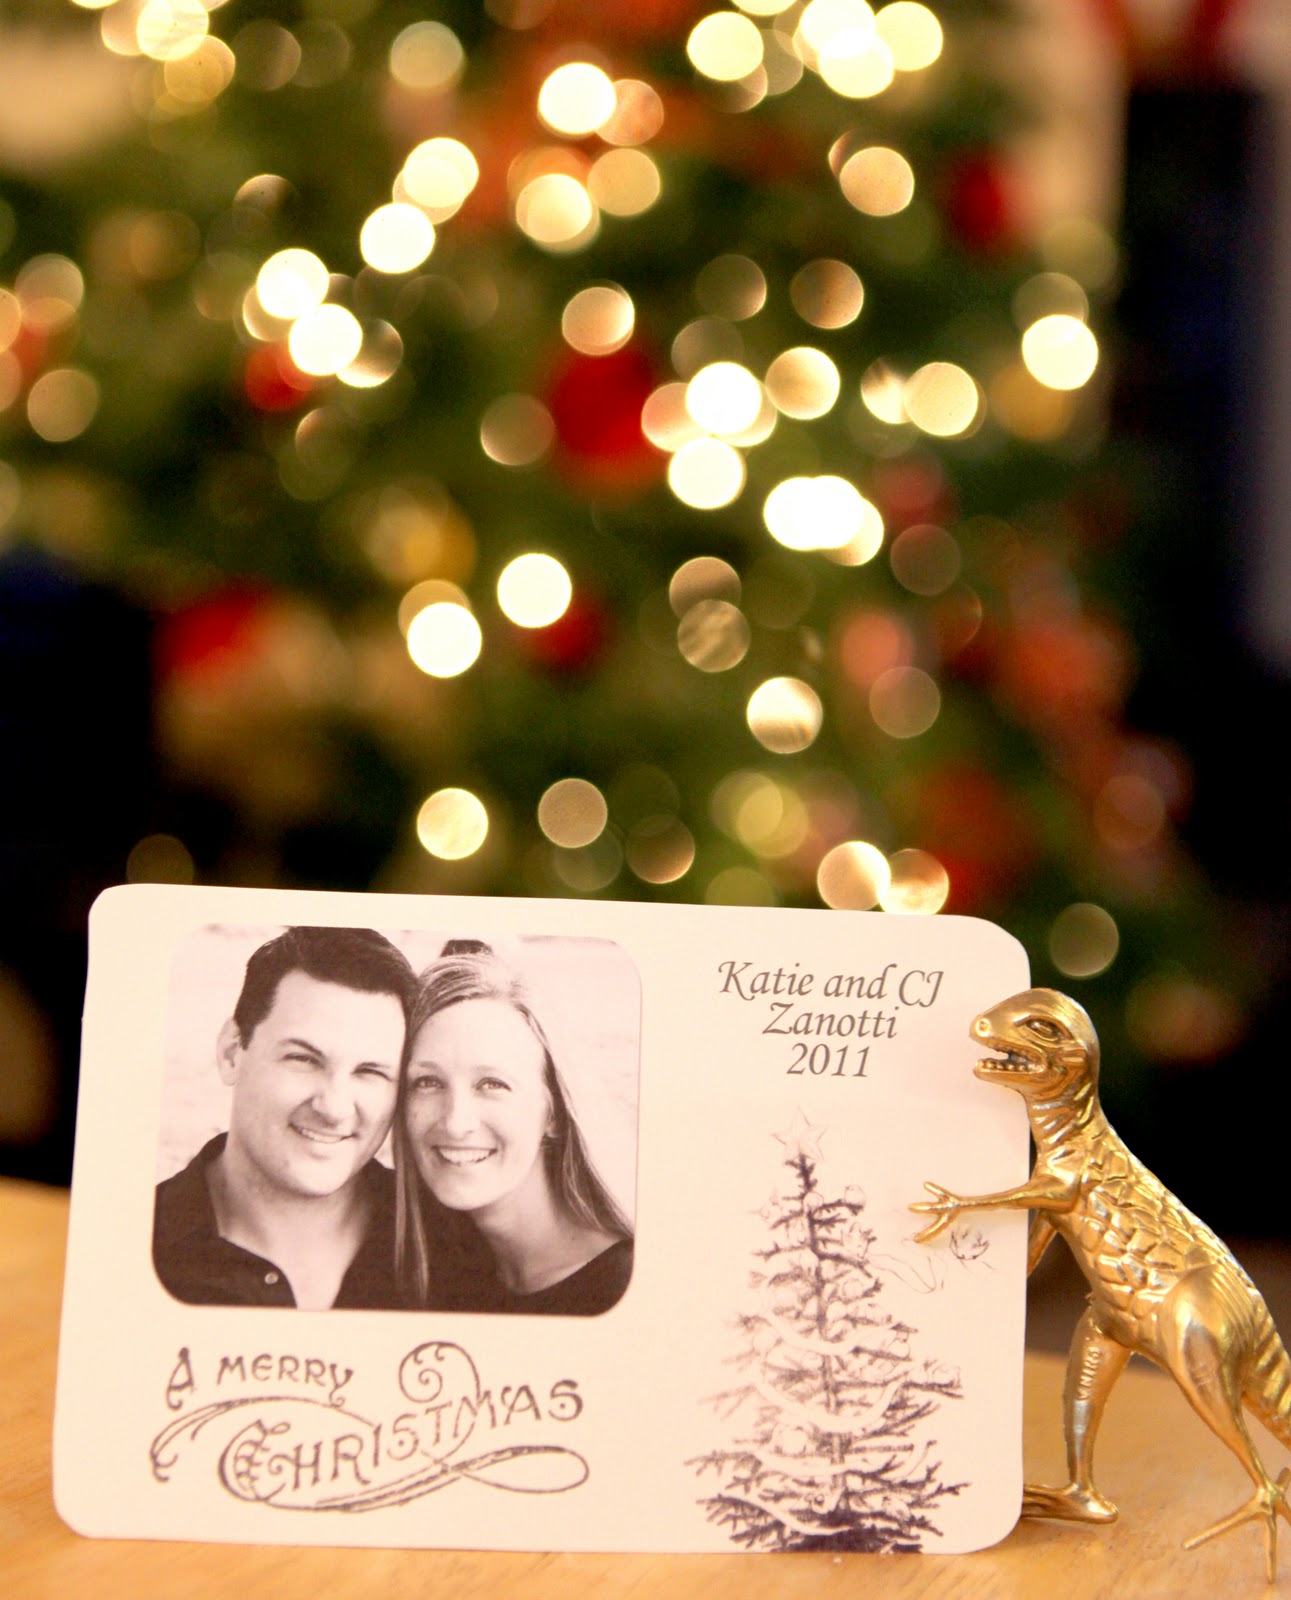 Chloe Moore Photography // The Blog: Free Christmas Card Templates!